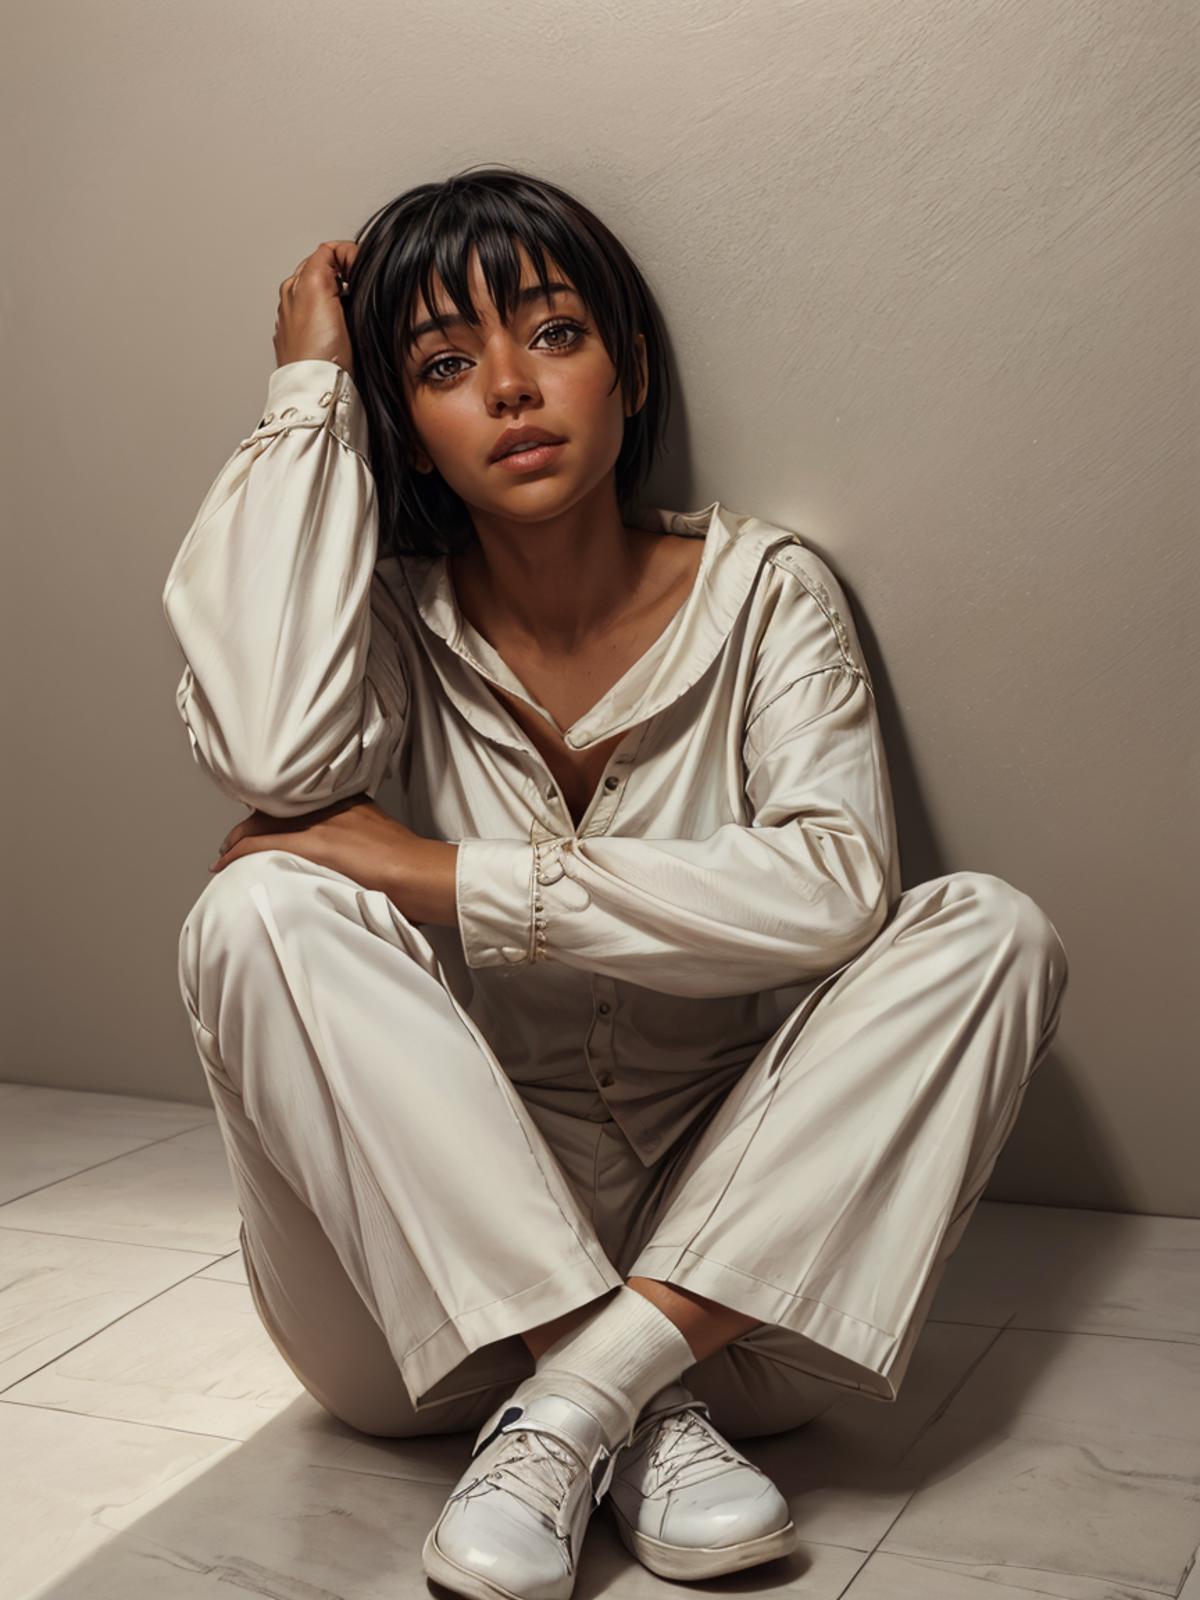 A young woman sitting against a wall wearing white clothing.